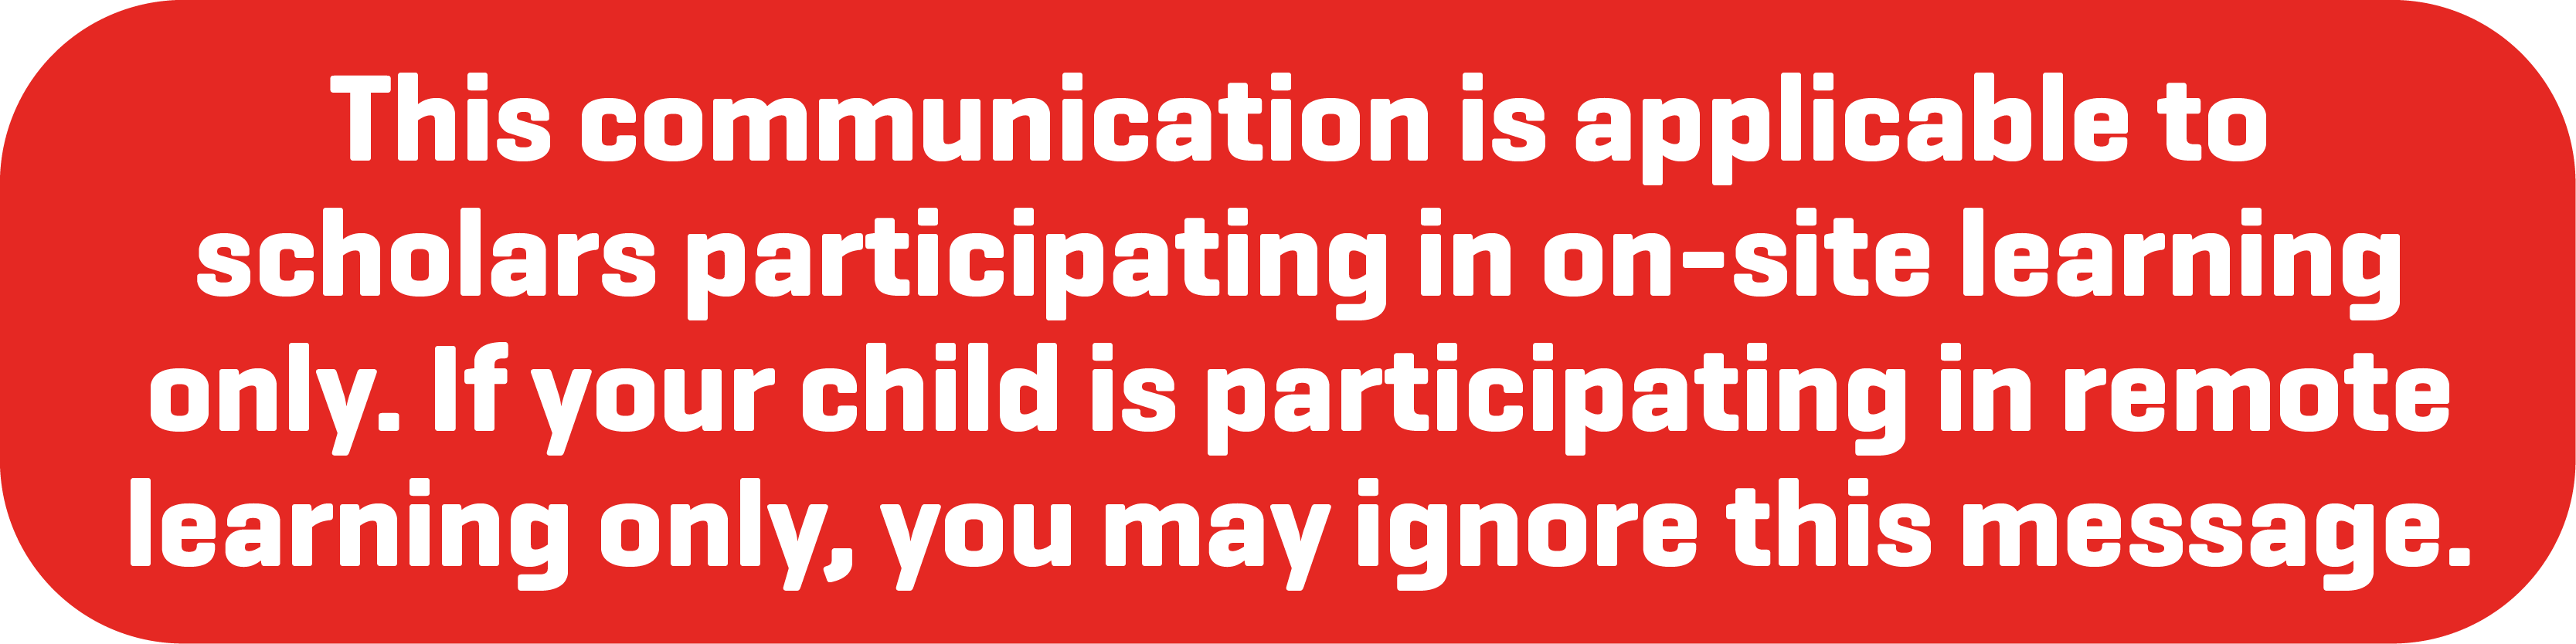 This communication is applicable to scholars participating in on-site learning only. If your child is participating in remote learning only, you may ignore this message.